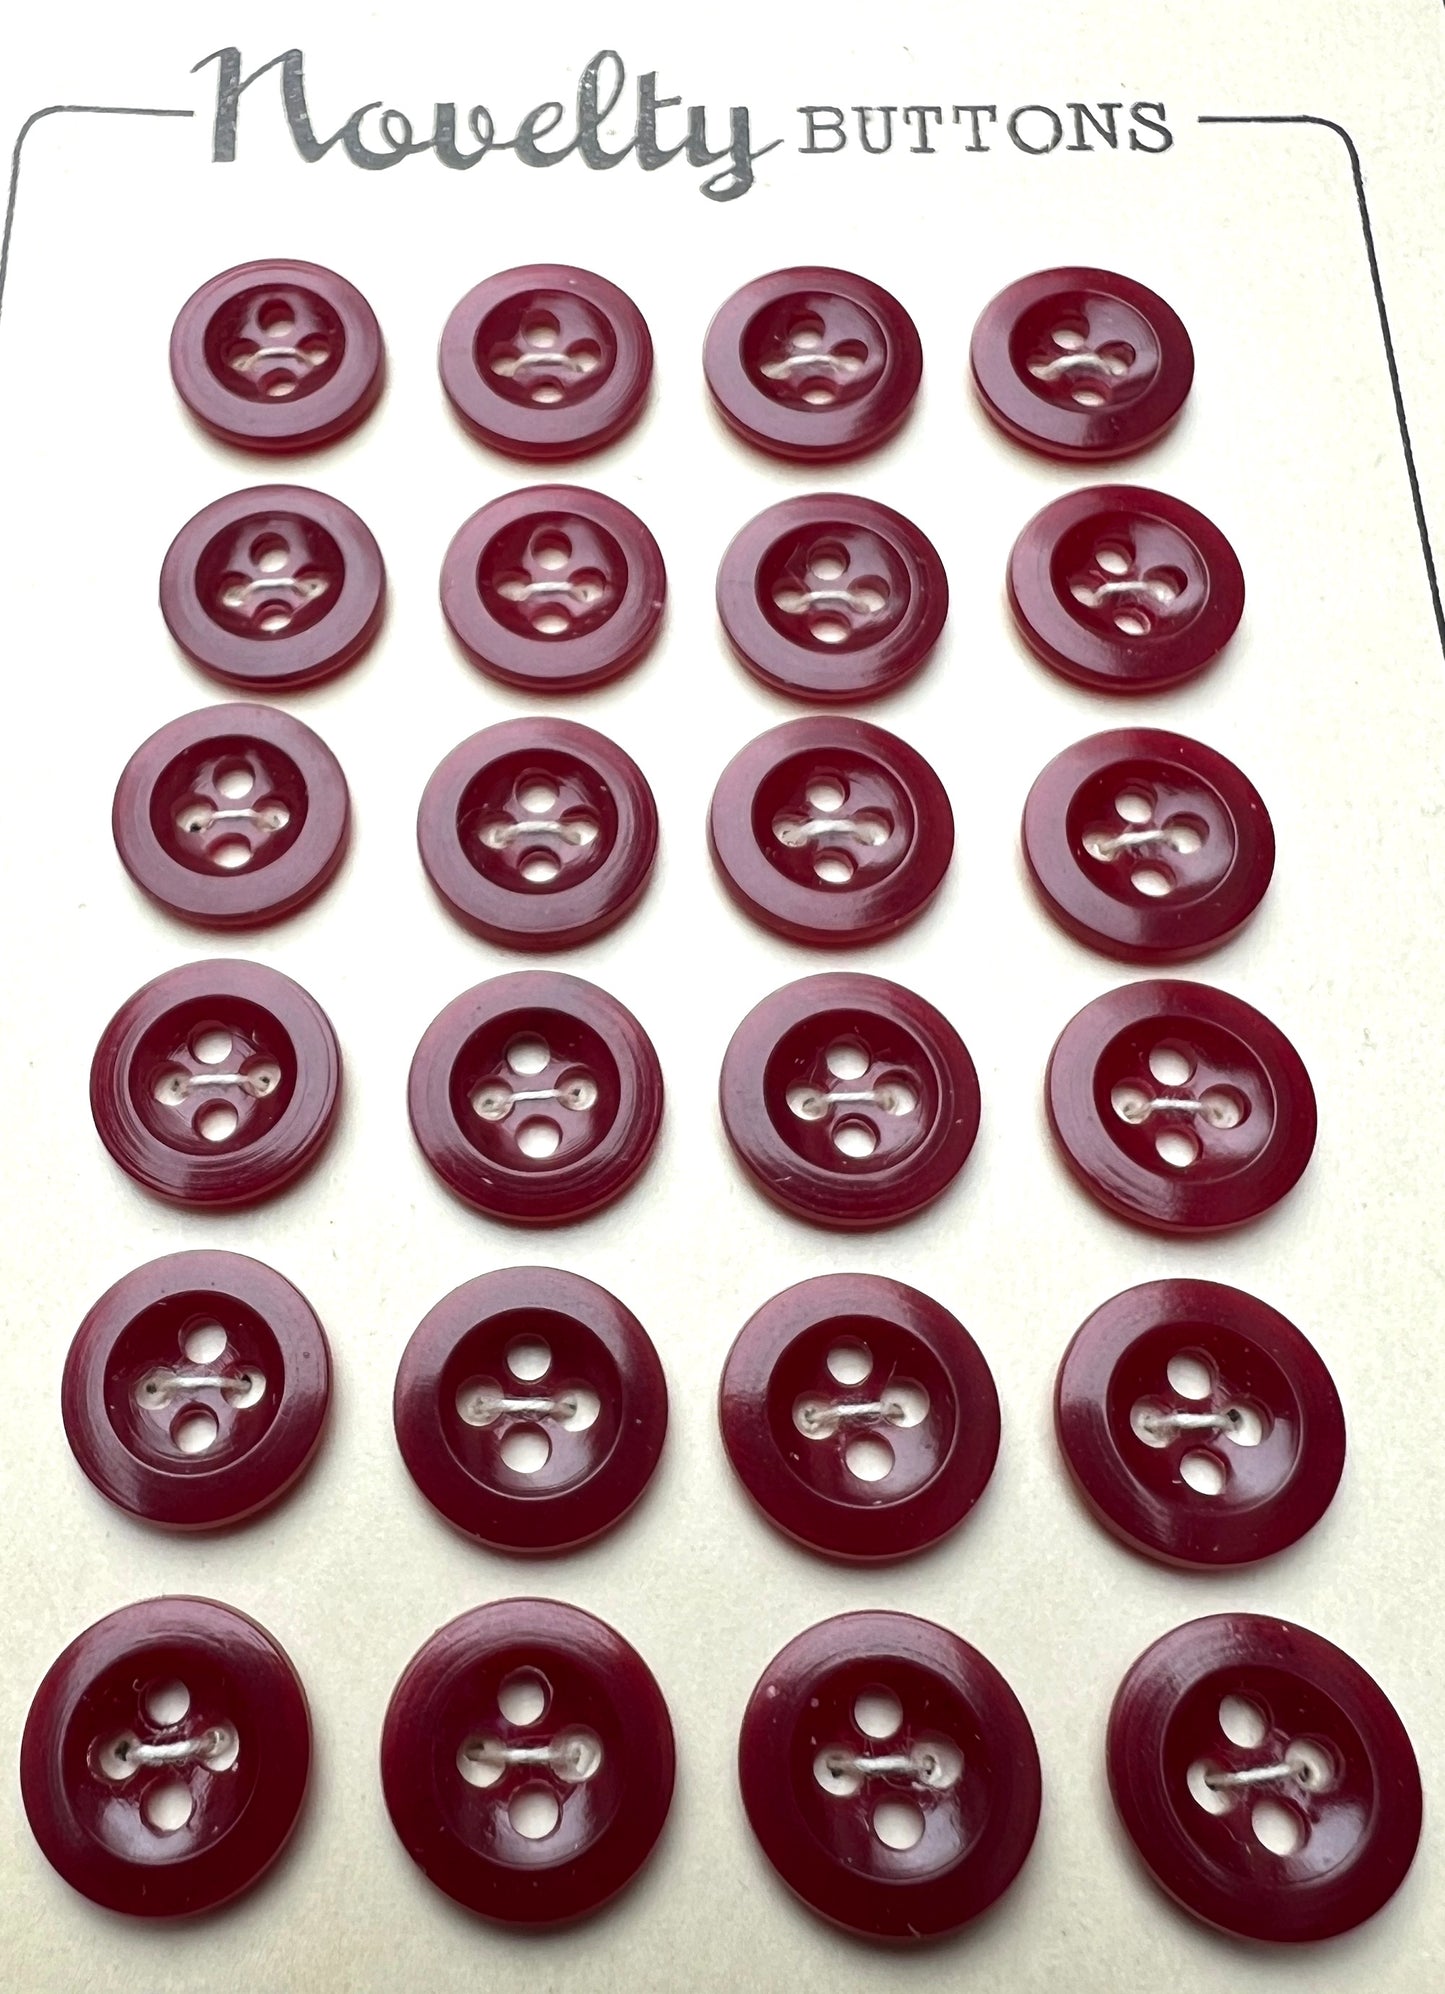 24 Vintage 1940s British 1cm or 1.3cm Shiny Maroon Buttons